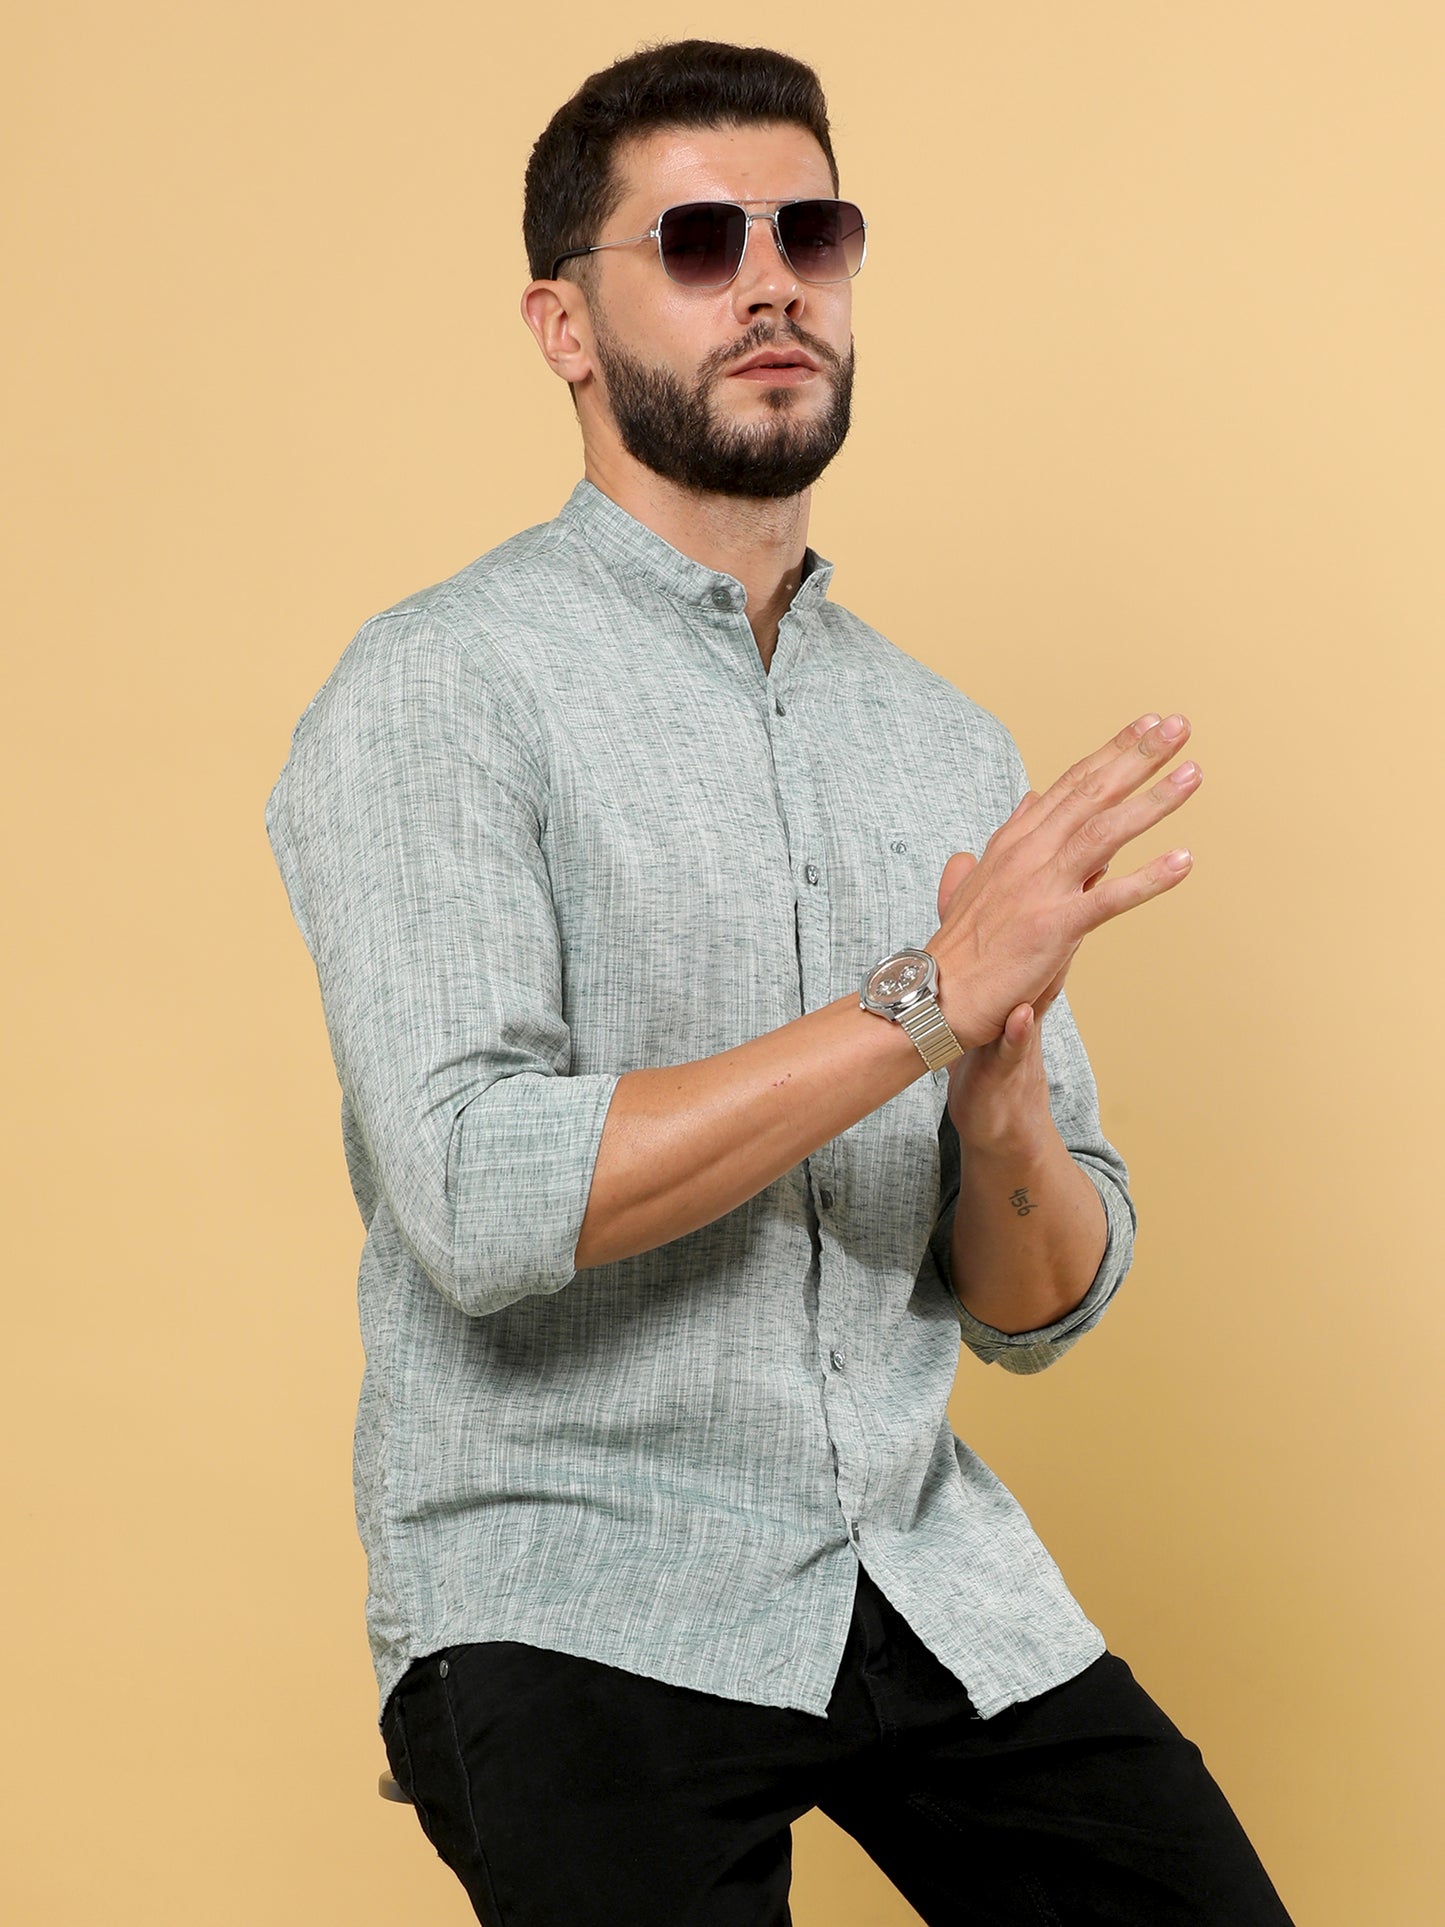 Pastle Grey Solid Shirt